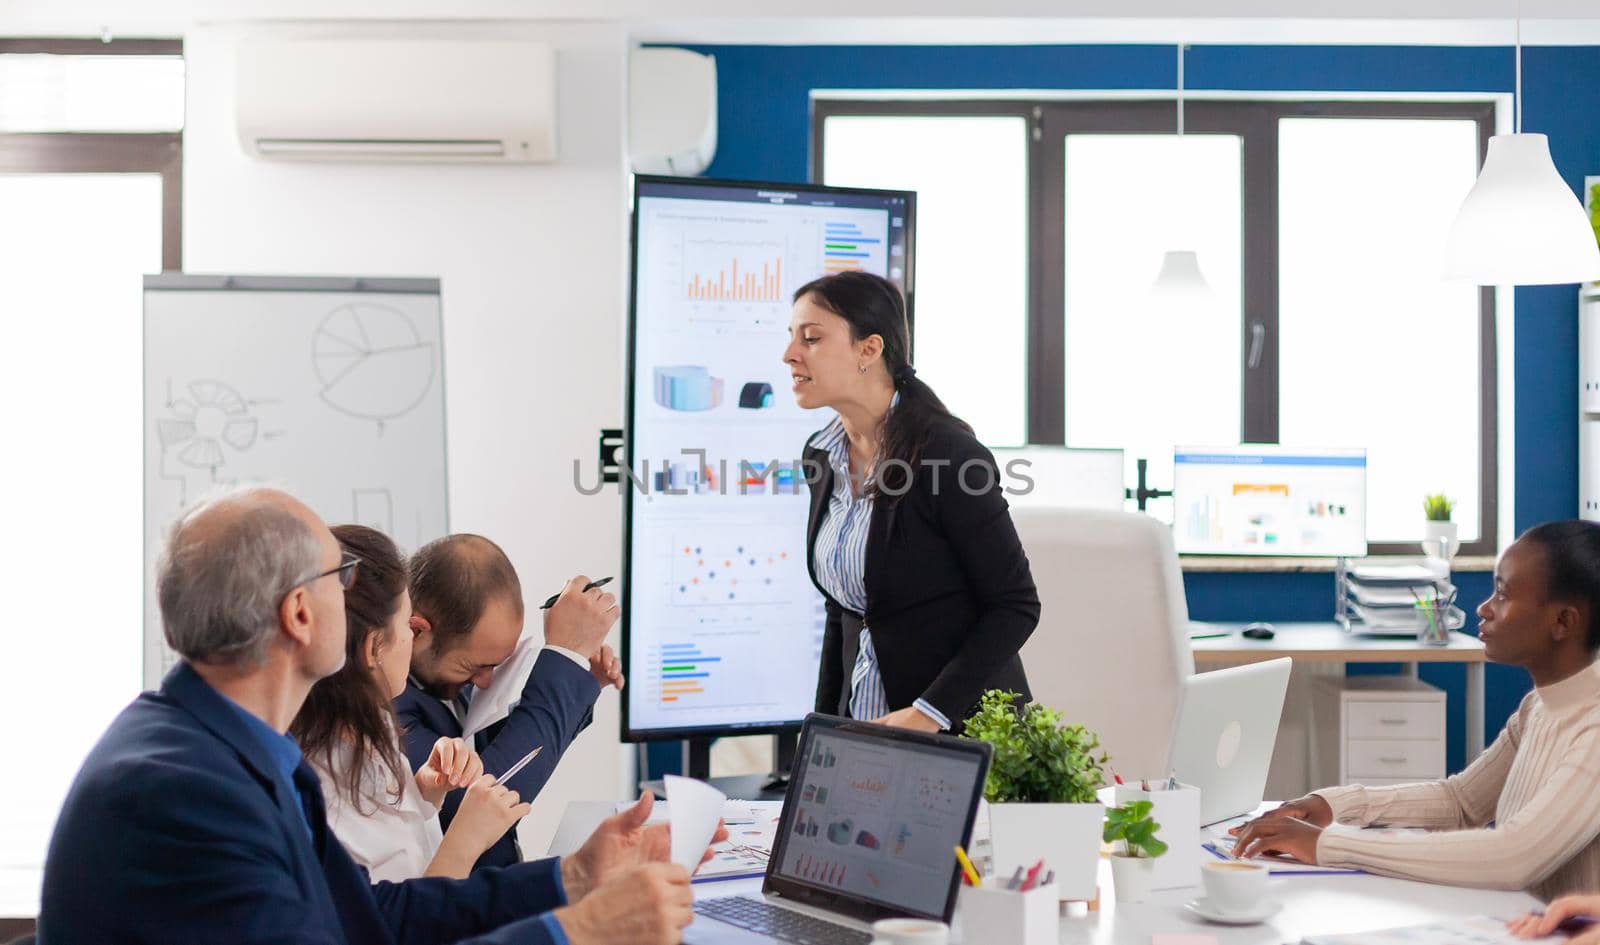 Furious entrepreneur hitting employee with clipboard by DCStudio